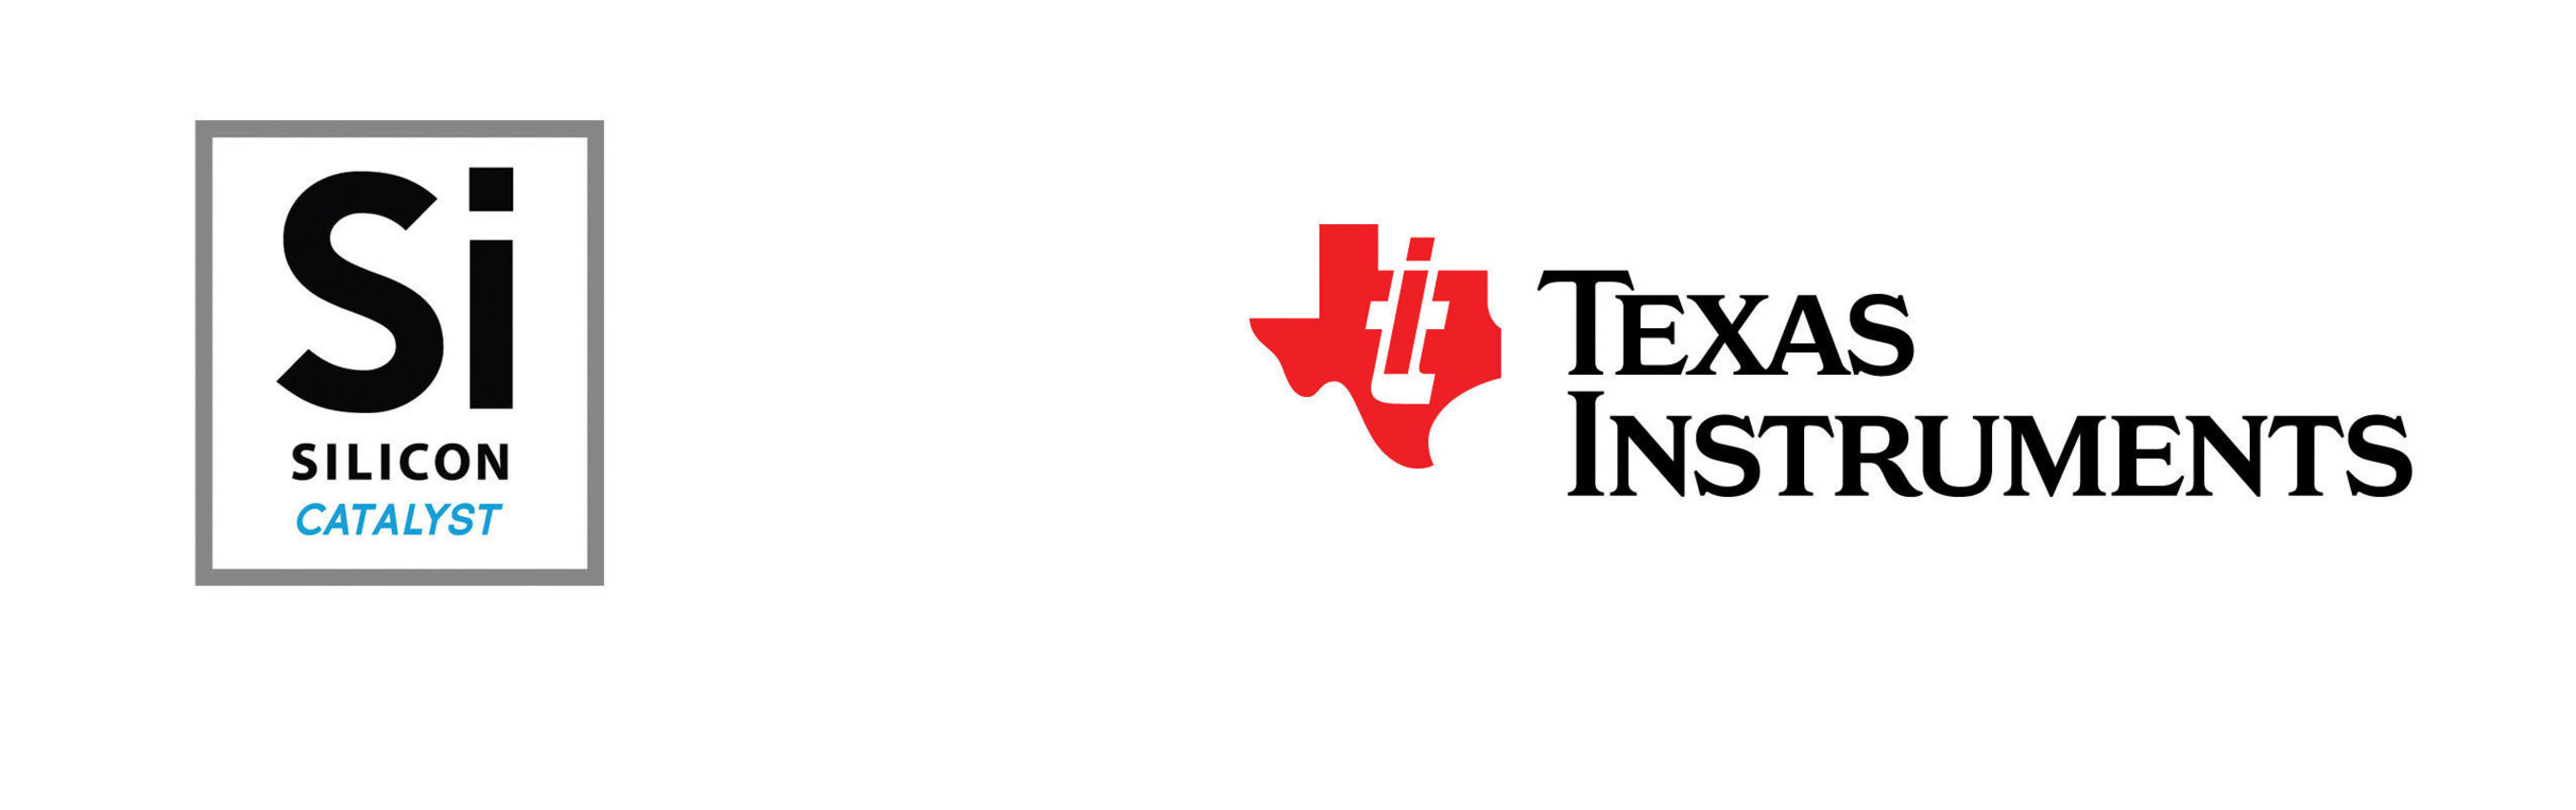 Texas Instruments to gain access to early semiconductor innovations through strategic relationship with Silicon Catalyst